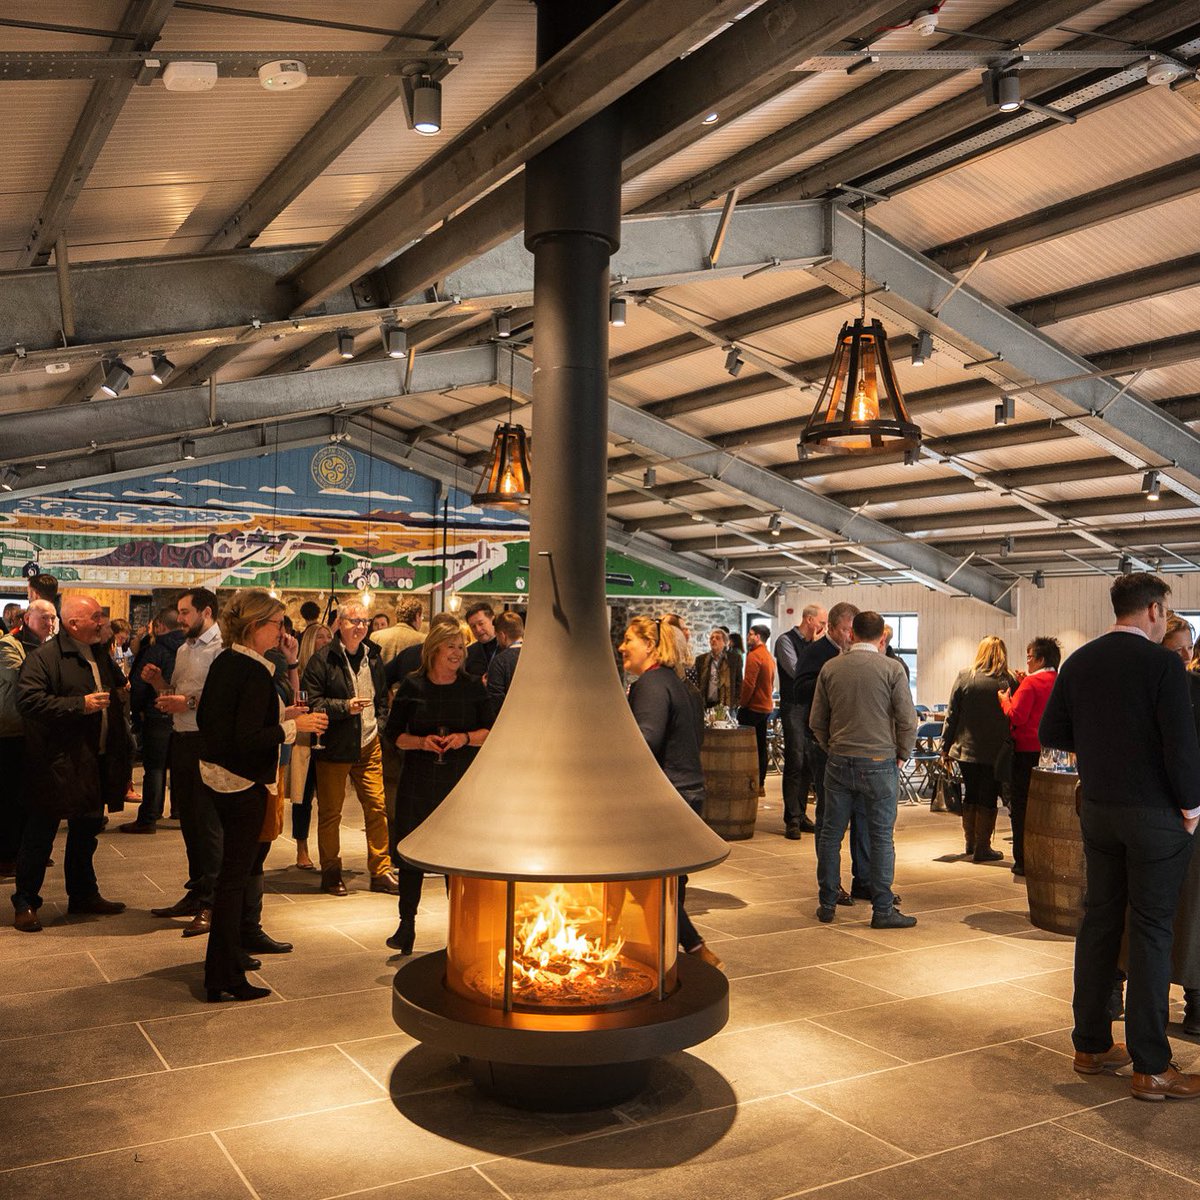 On Friday 21st February we were joined by family, friends, colleagues and local businesses as we gathered to celebrate the #opening of our new #StillHouse and #VisitorCentre. It is another #momentous occasion since #Kilchoman Distillery first opened in 2005.